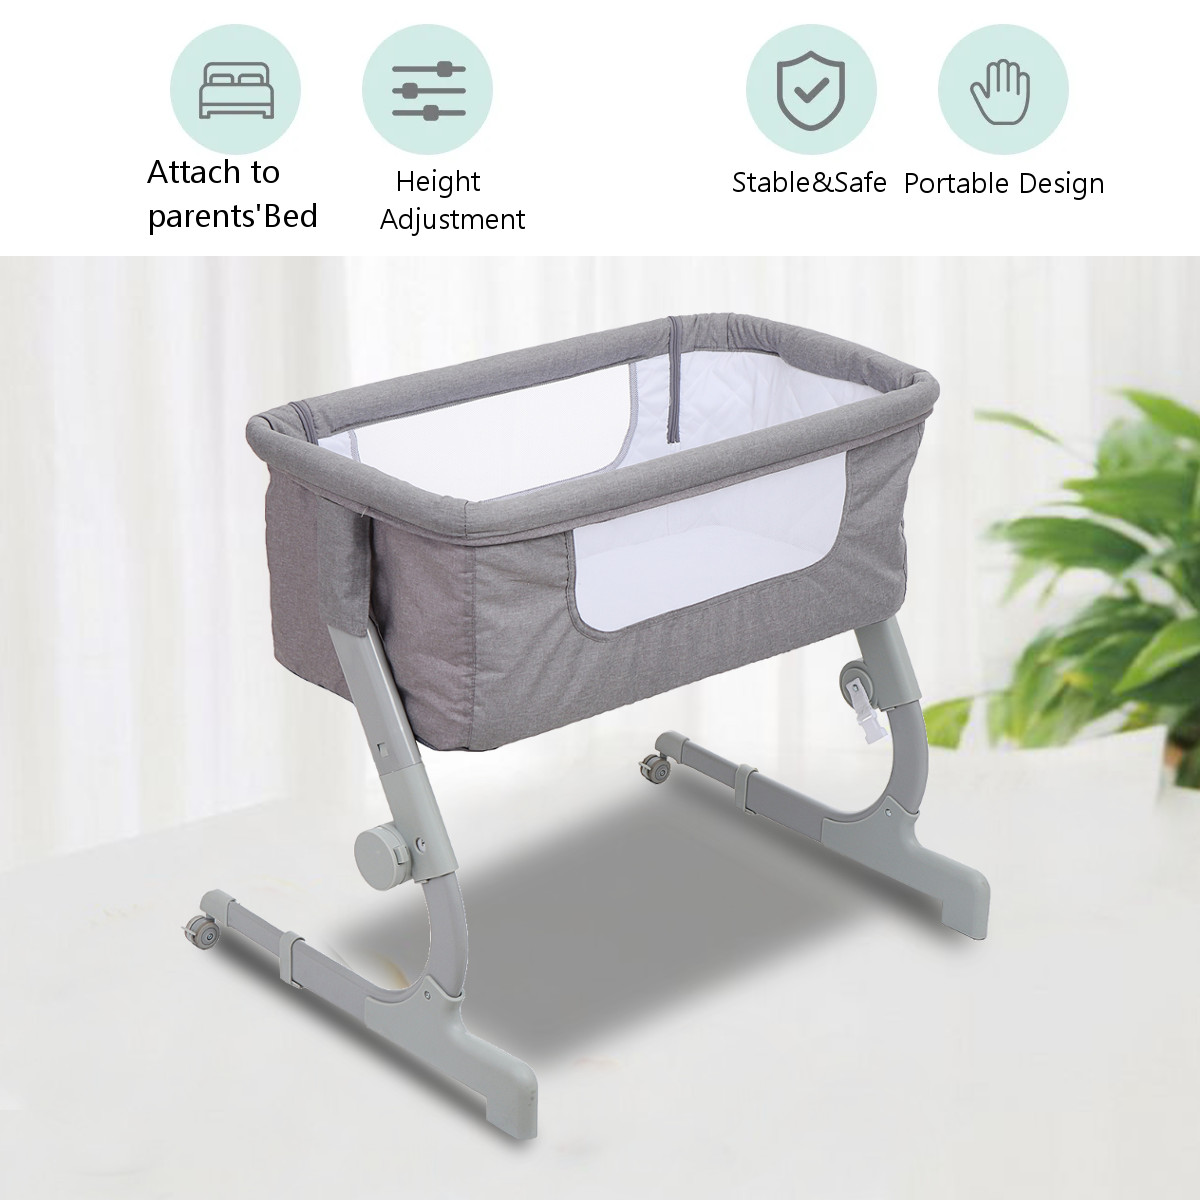 2-in-1-Portable-Sideway-Baby-Crib-Height-Adjustment-Infans-Stitching-Bed-Removable-Bed-1942872-2